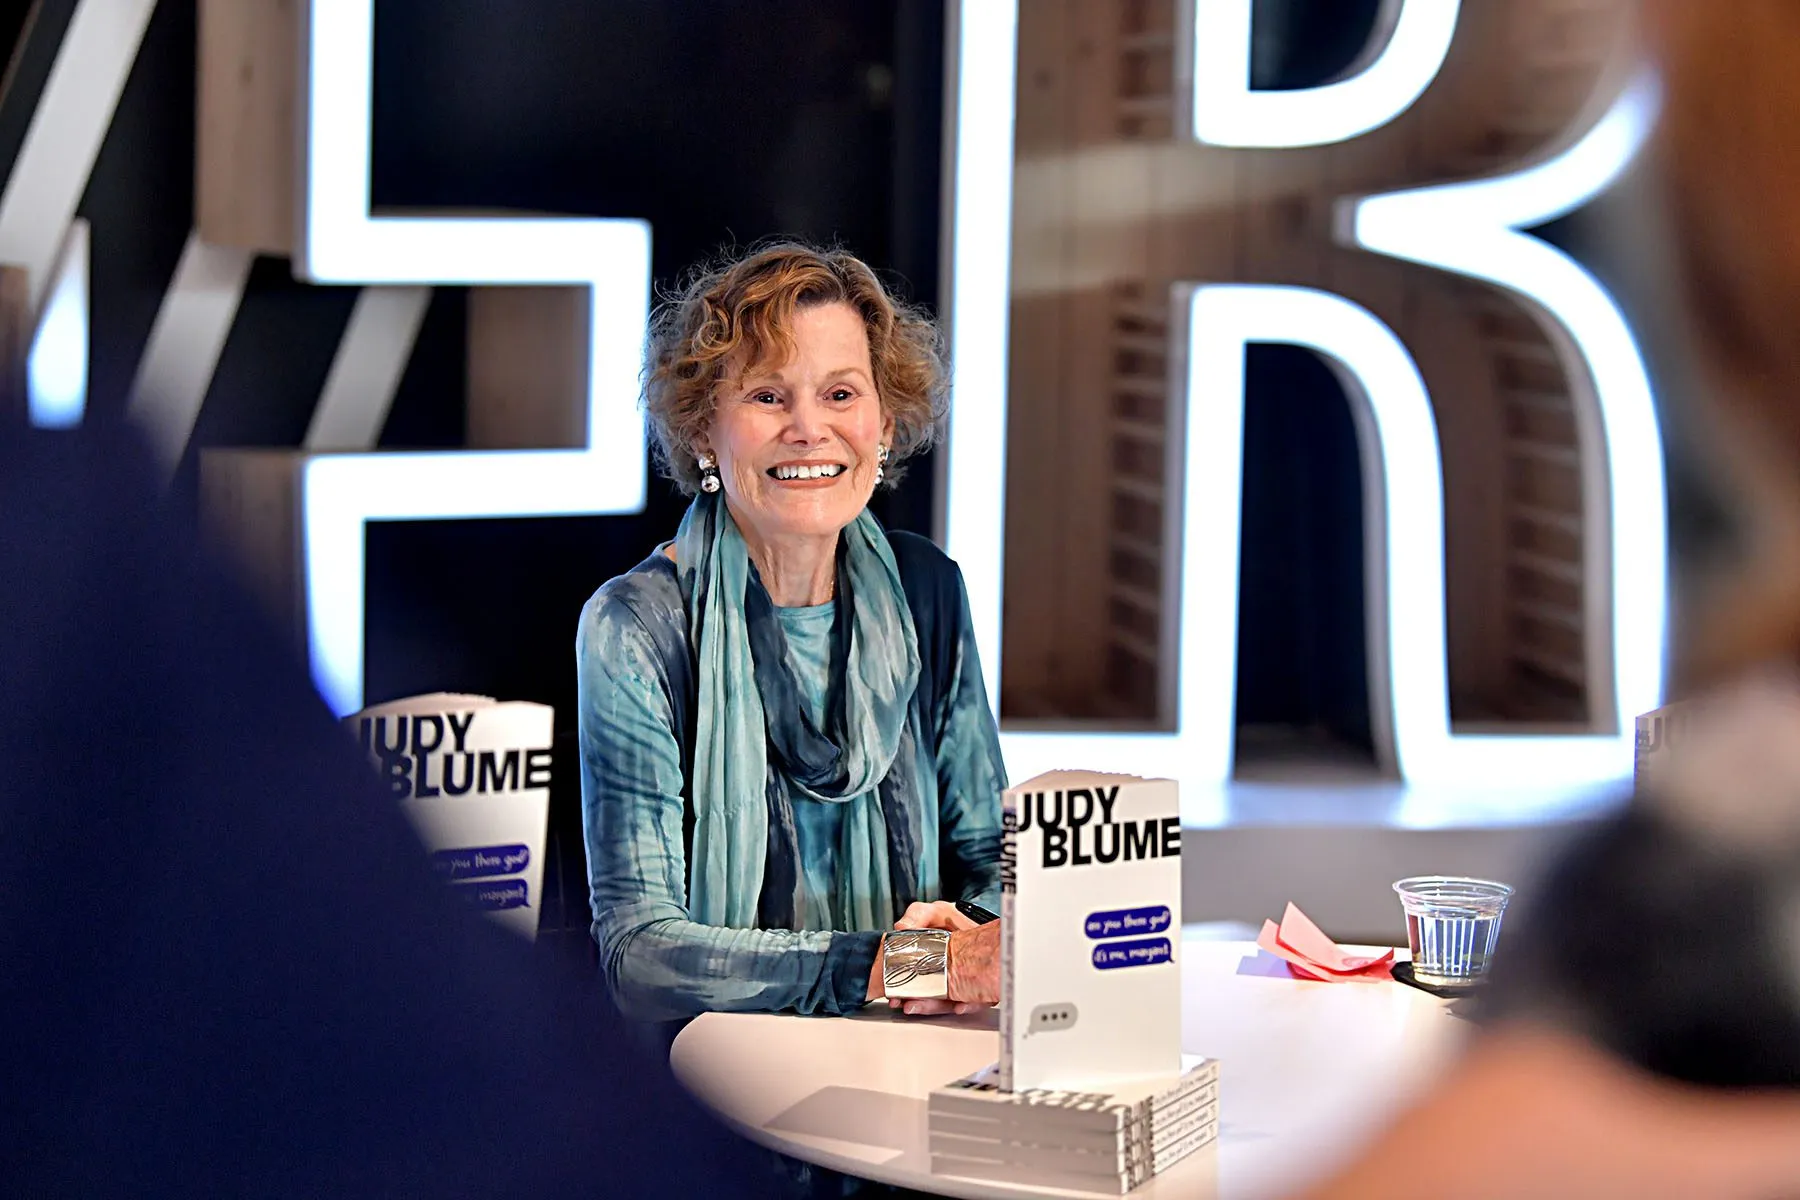 Judy Blume attends The 2020 MAKERS Conference in Los Angeles in February 2020.